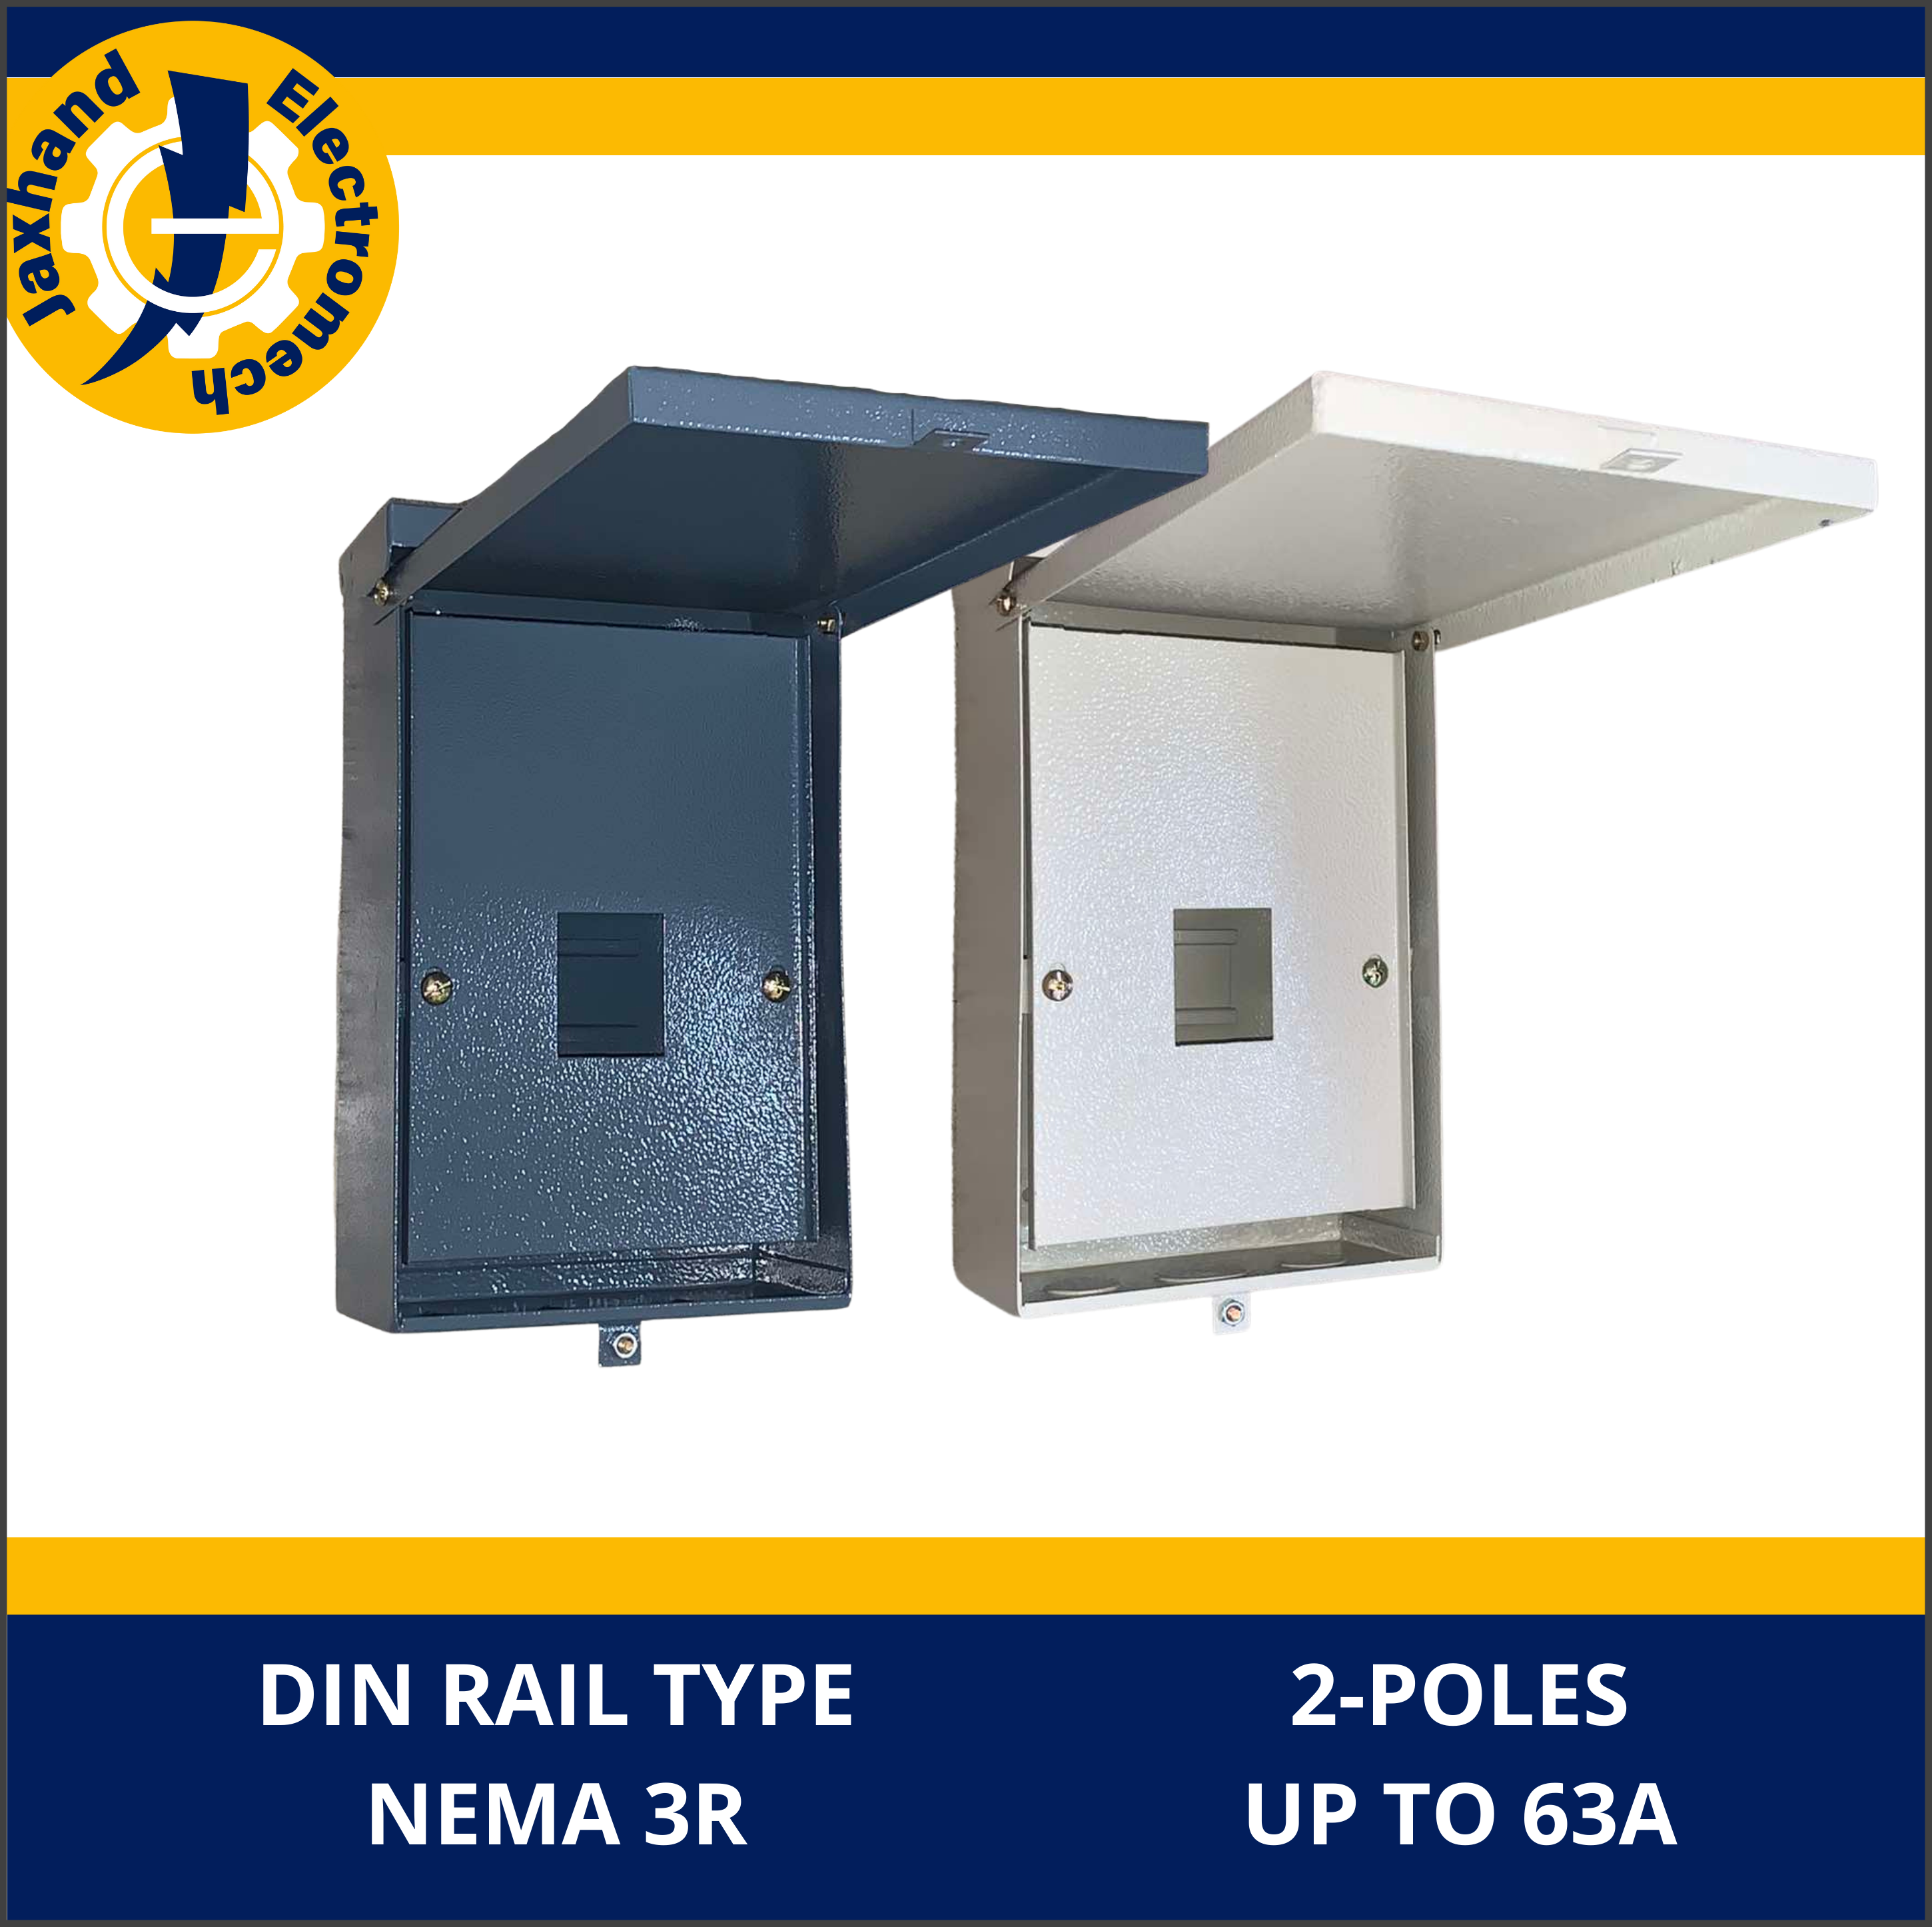 What Is a DIN Rail and How Can It Work on NEMA Enclosures?